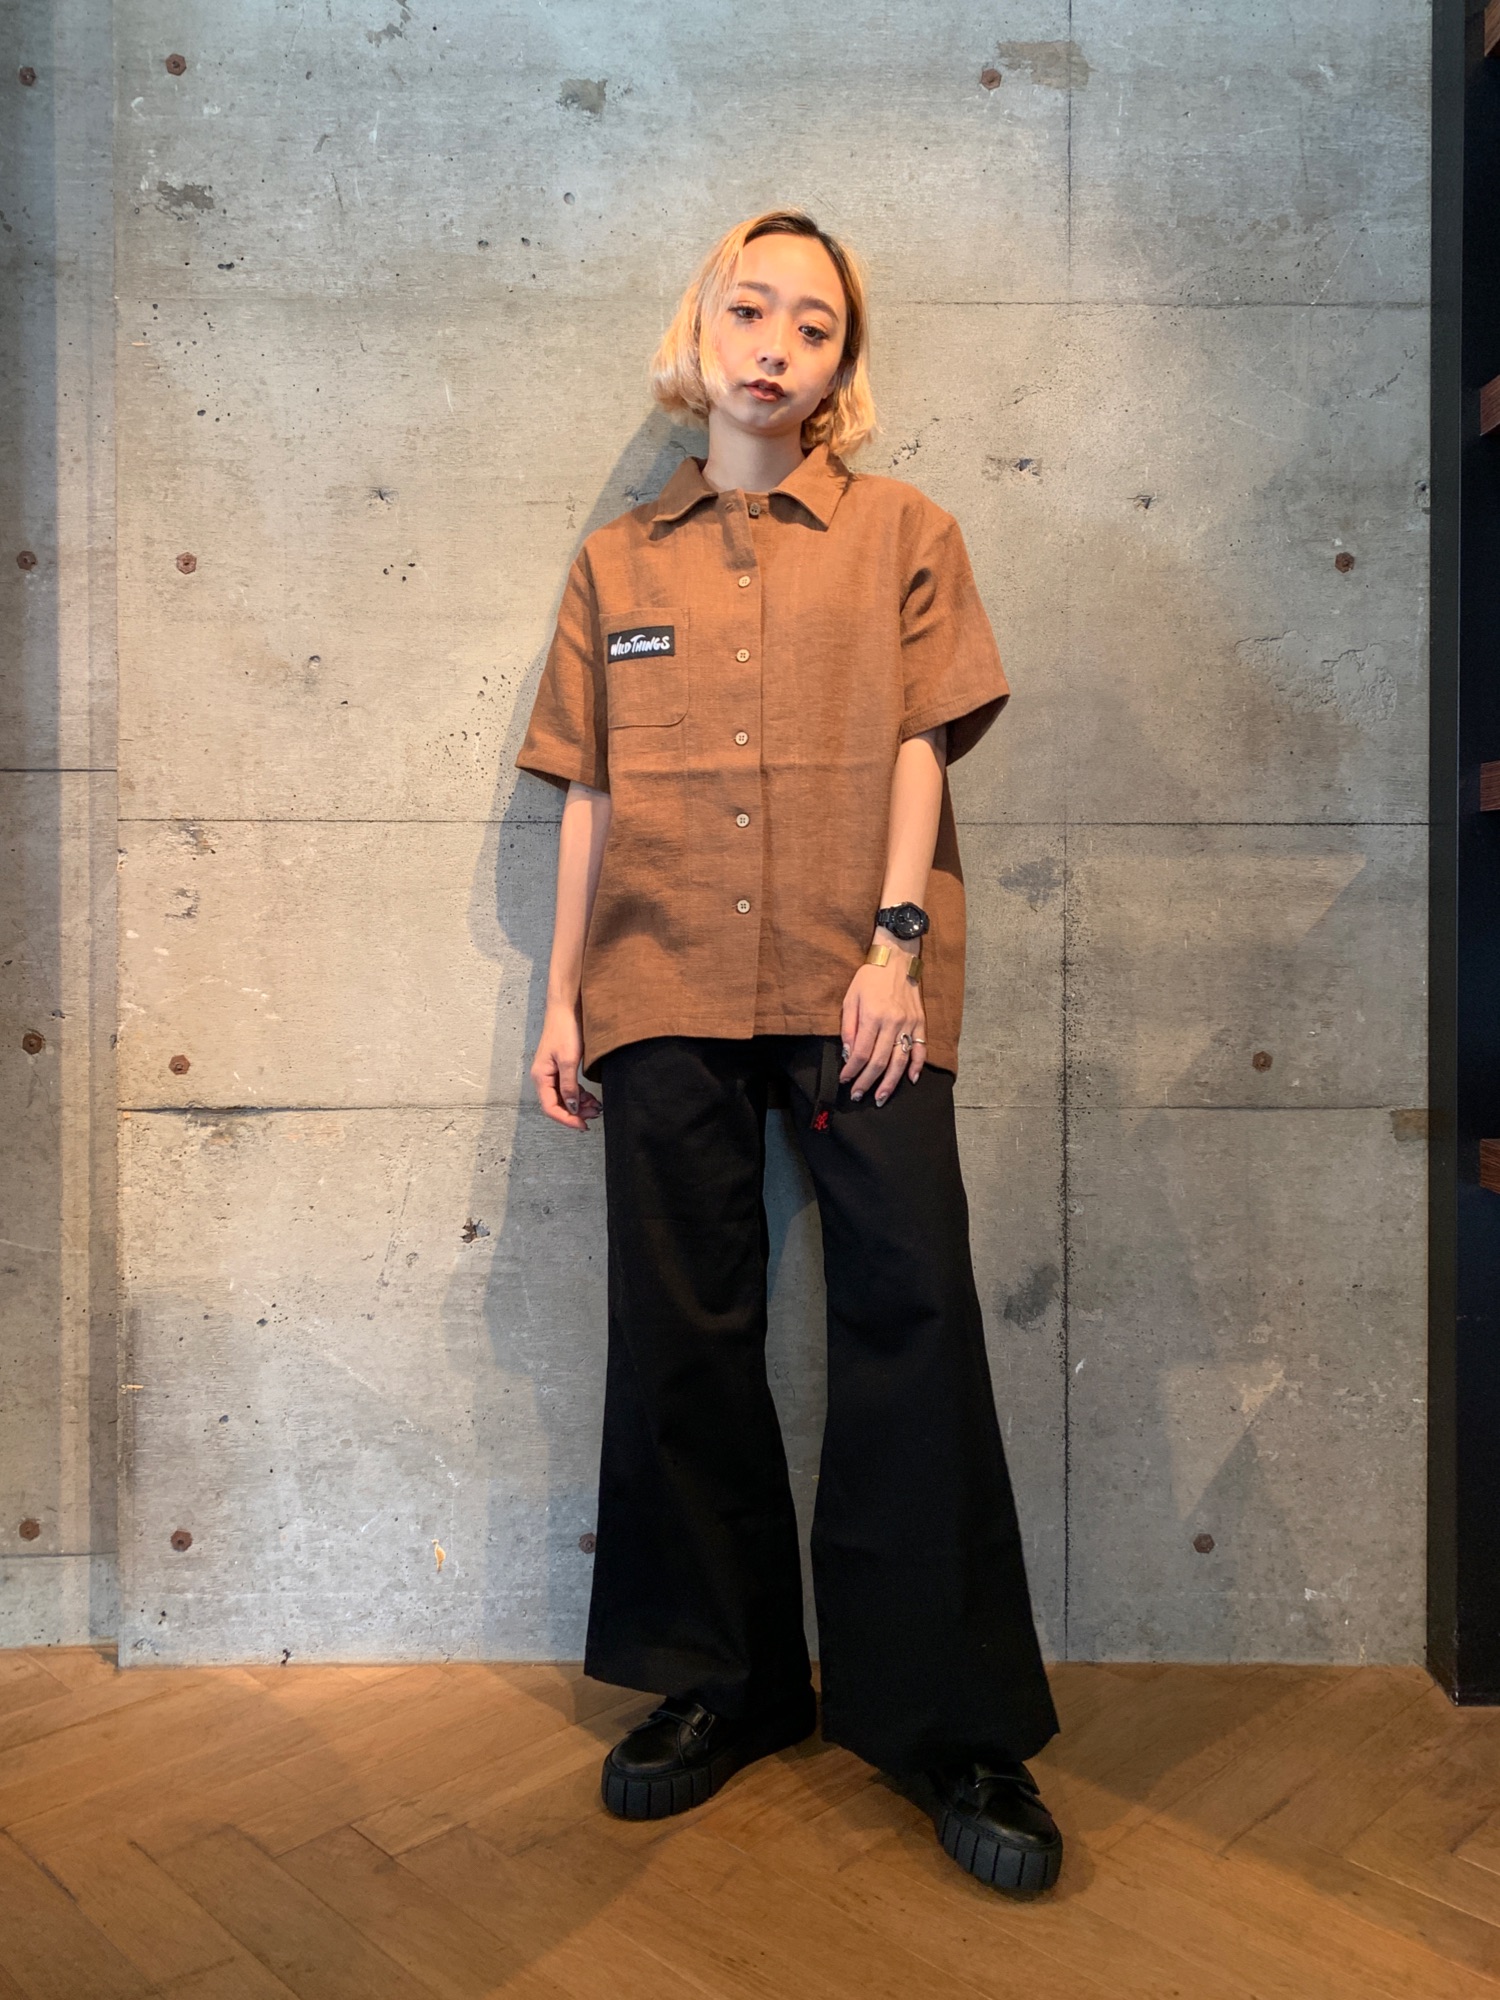 k3&co.（ケイスリーアンドコー）の「WILD THINGS×k3&co. SHIRTS